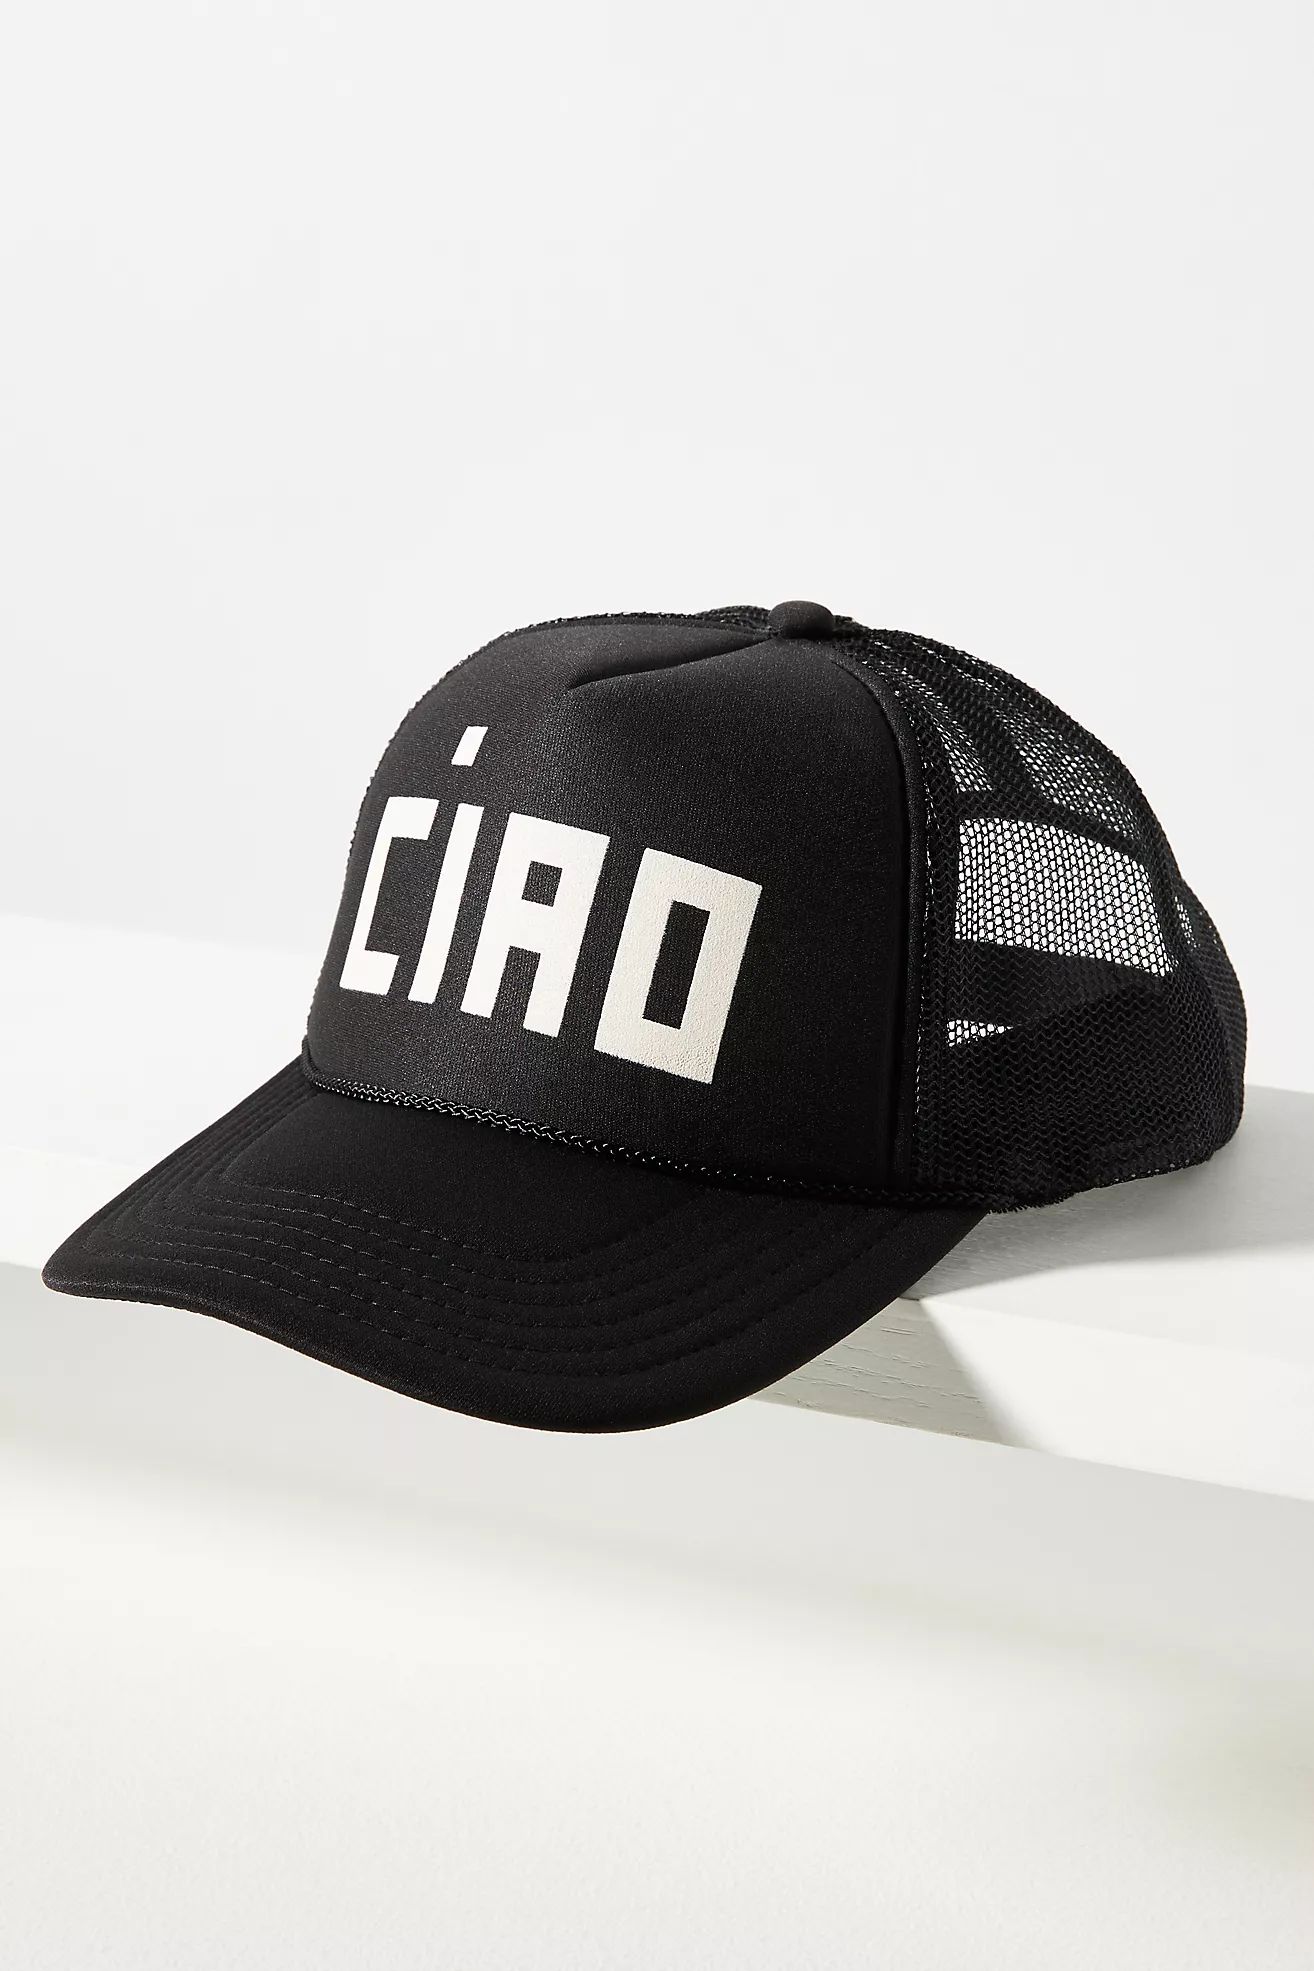 Clare V. Ciao Trucker Hat | Anthropologie (US)